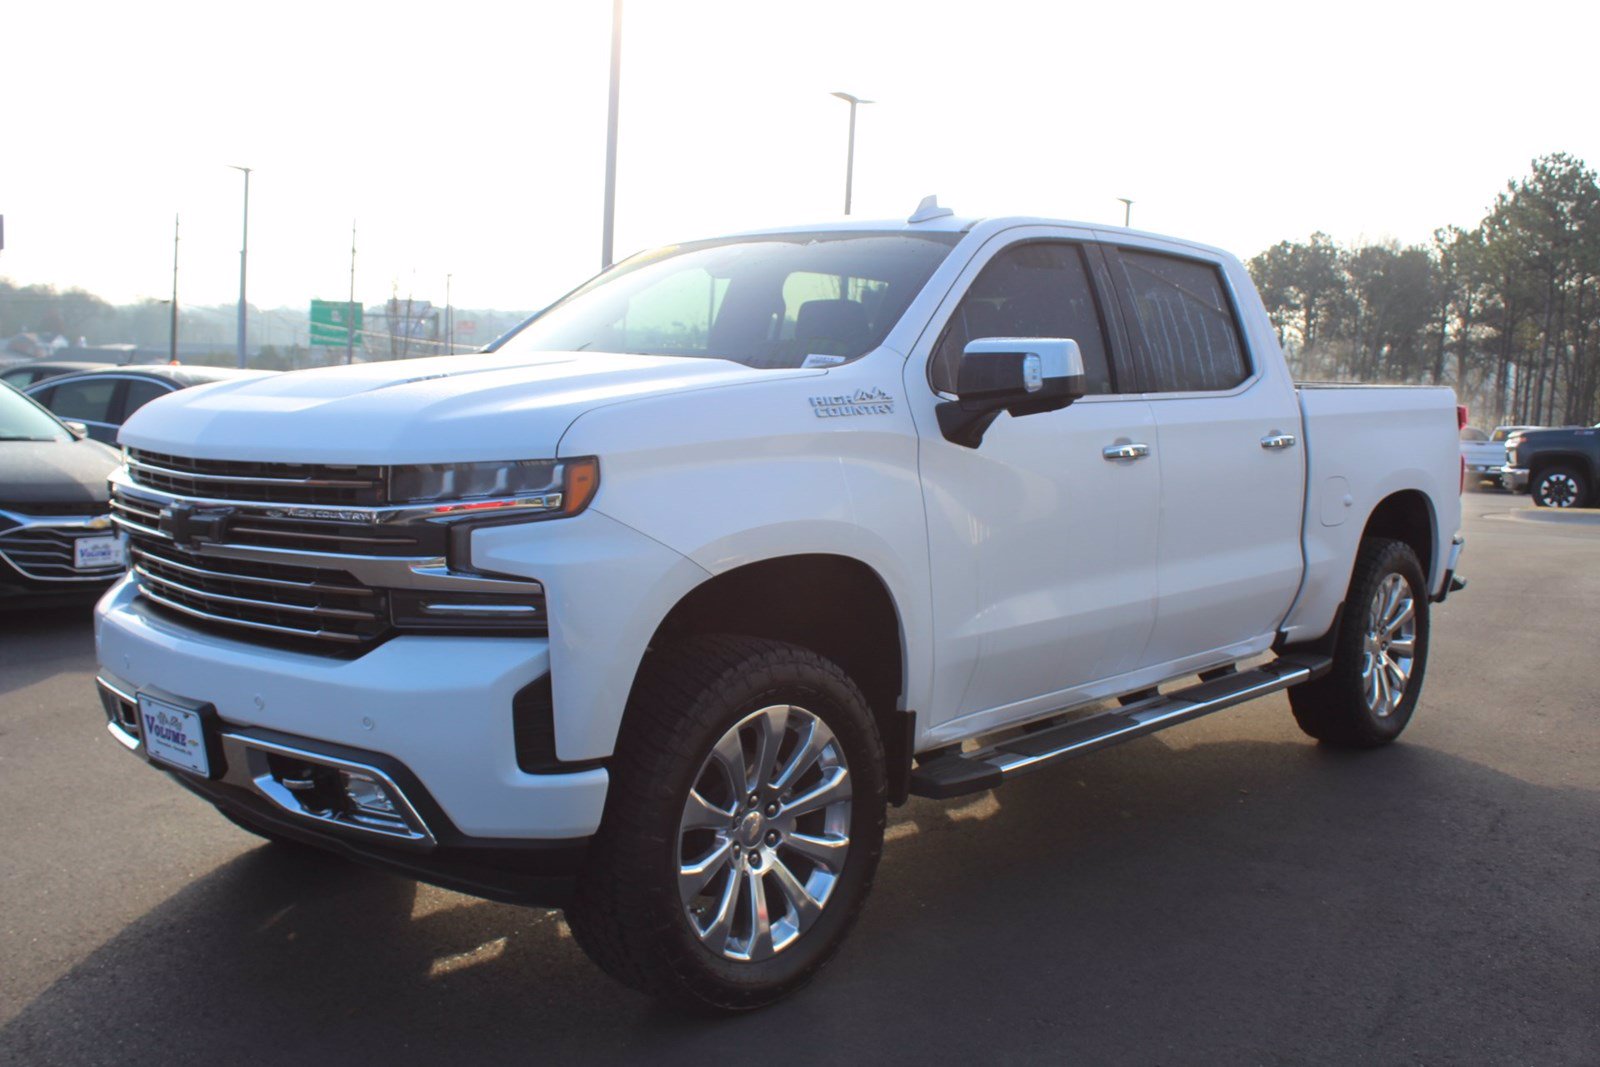 New 2019 Chevrolet Silverado 1500 High Country With Navigation And 4wd